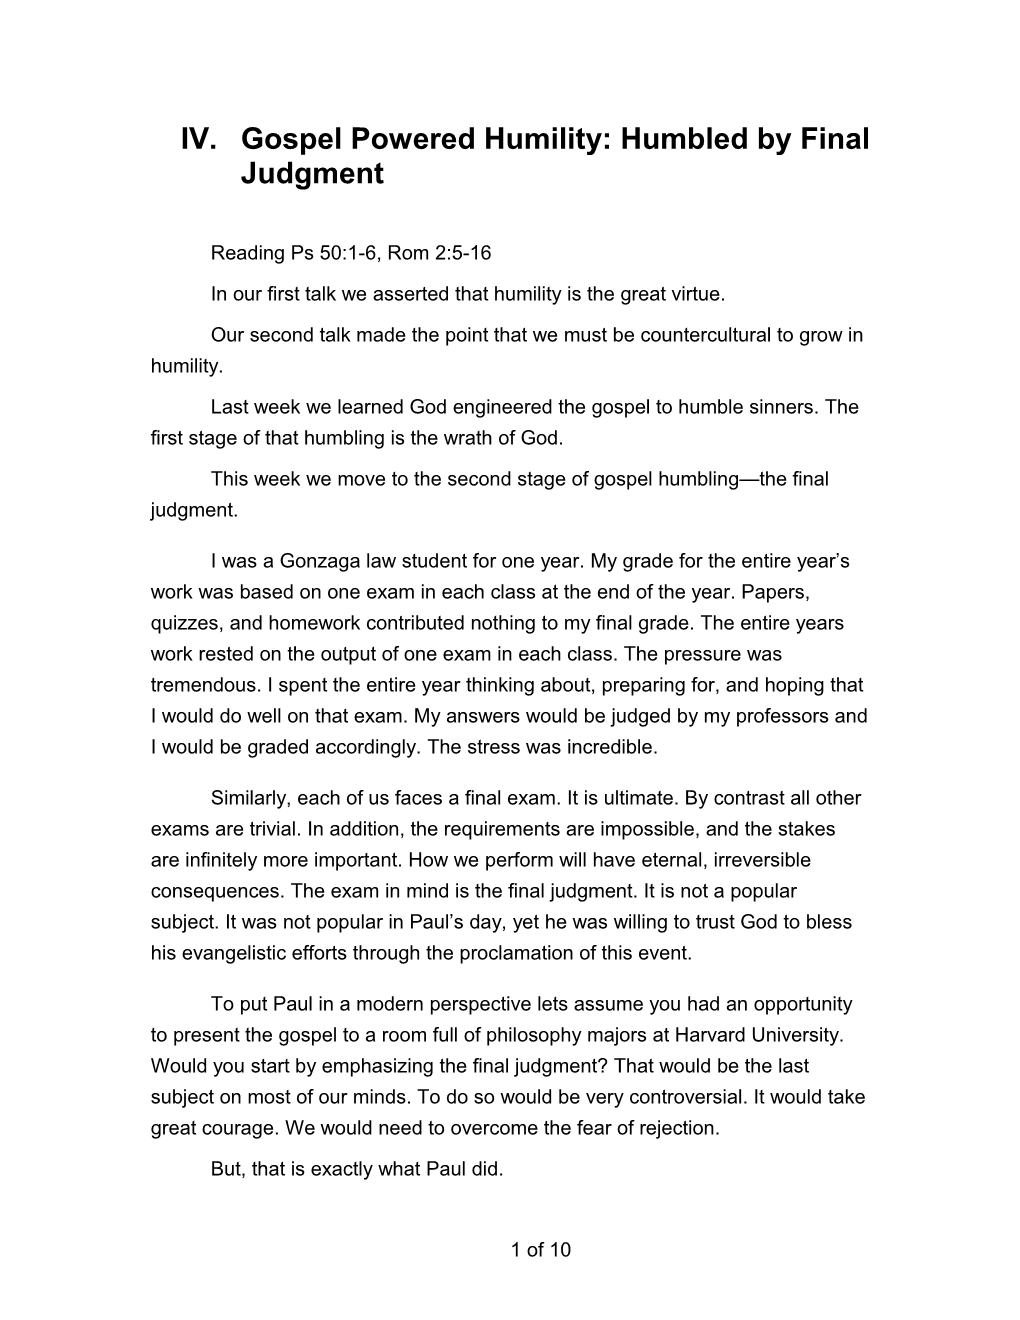 IV.Gospel Powered Humility: Humbled by Final Judgment